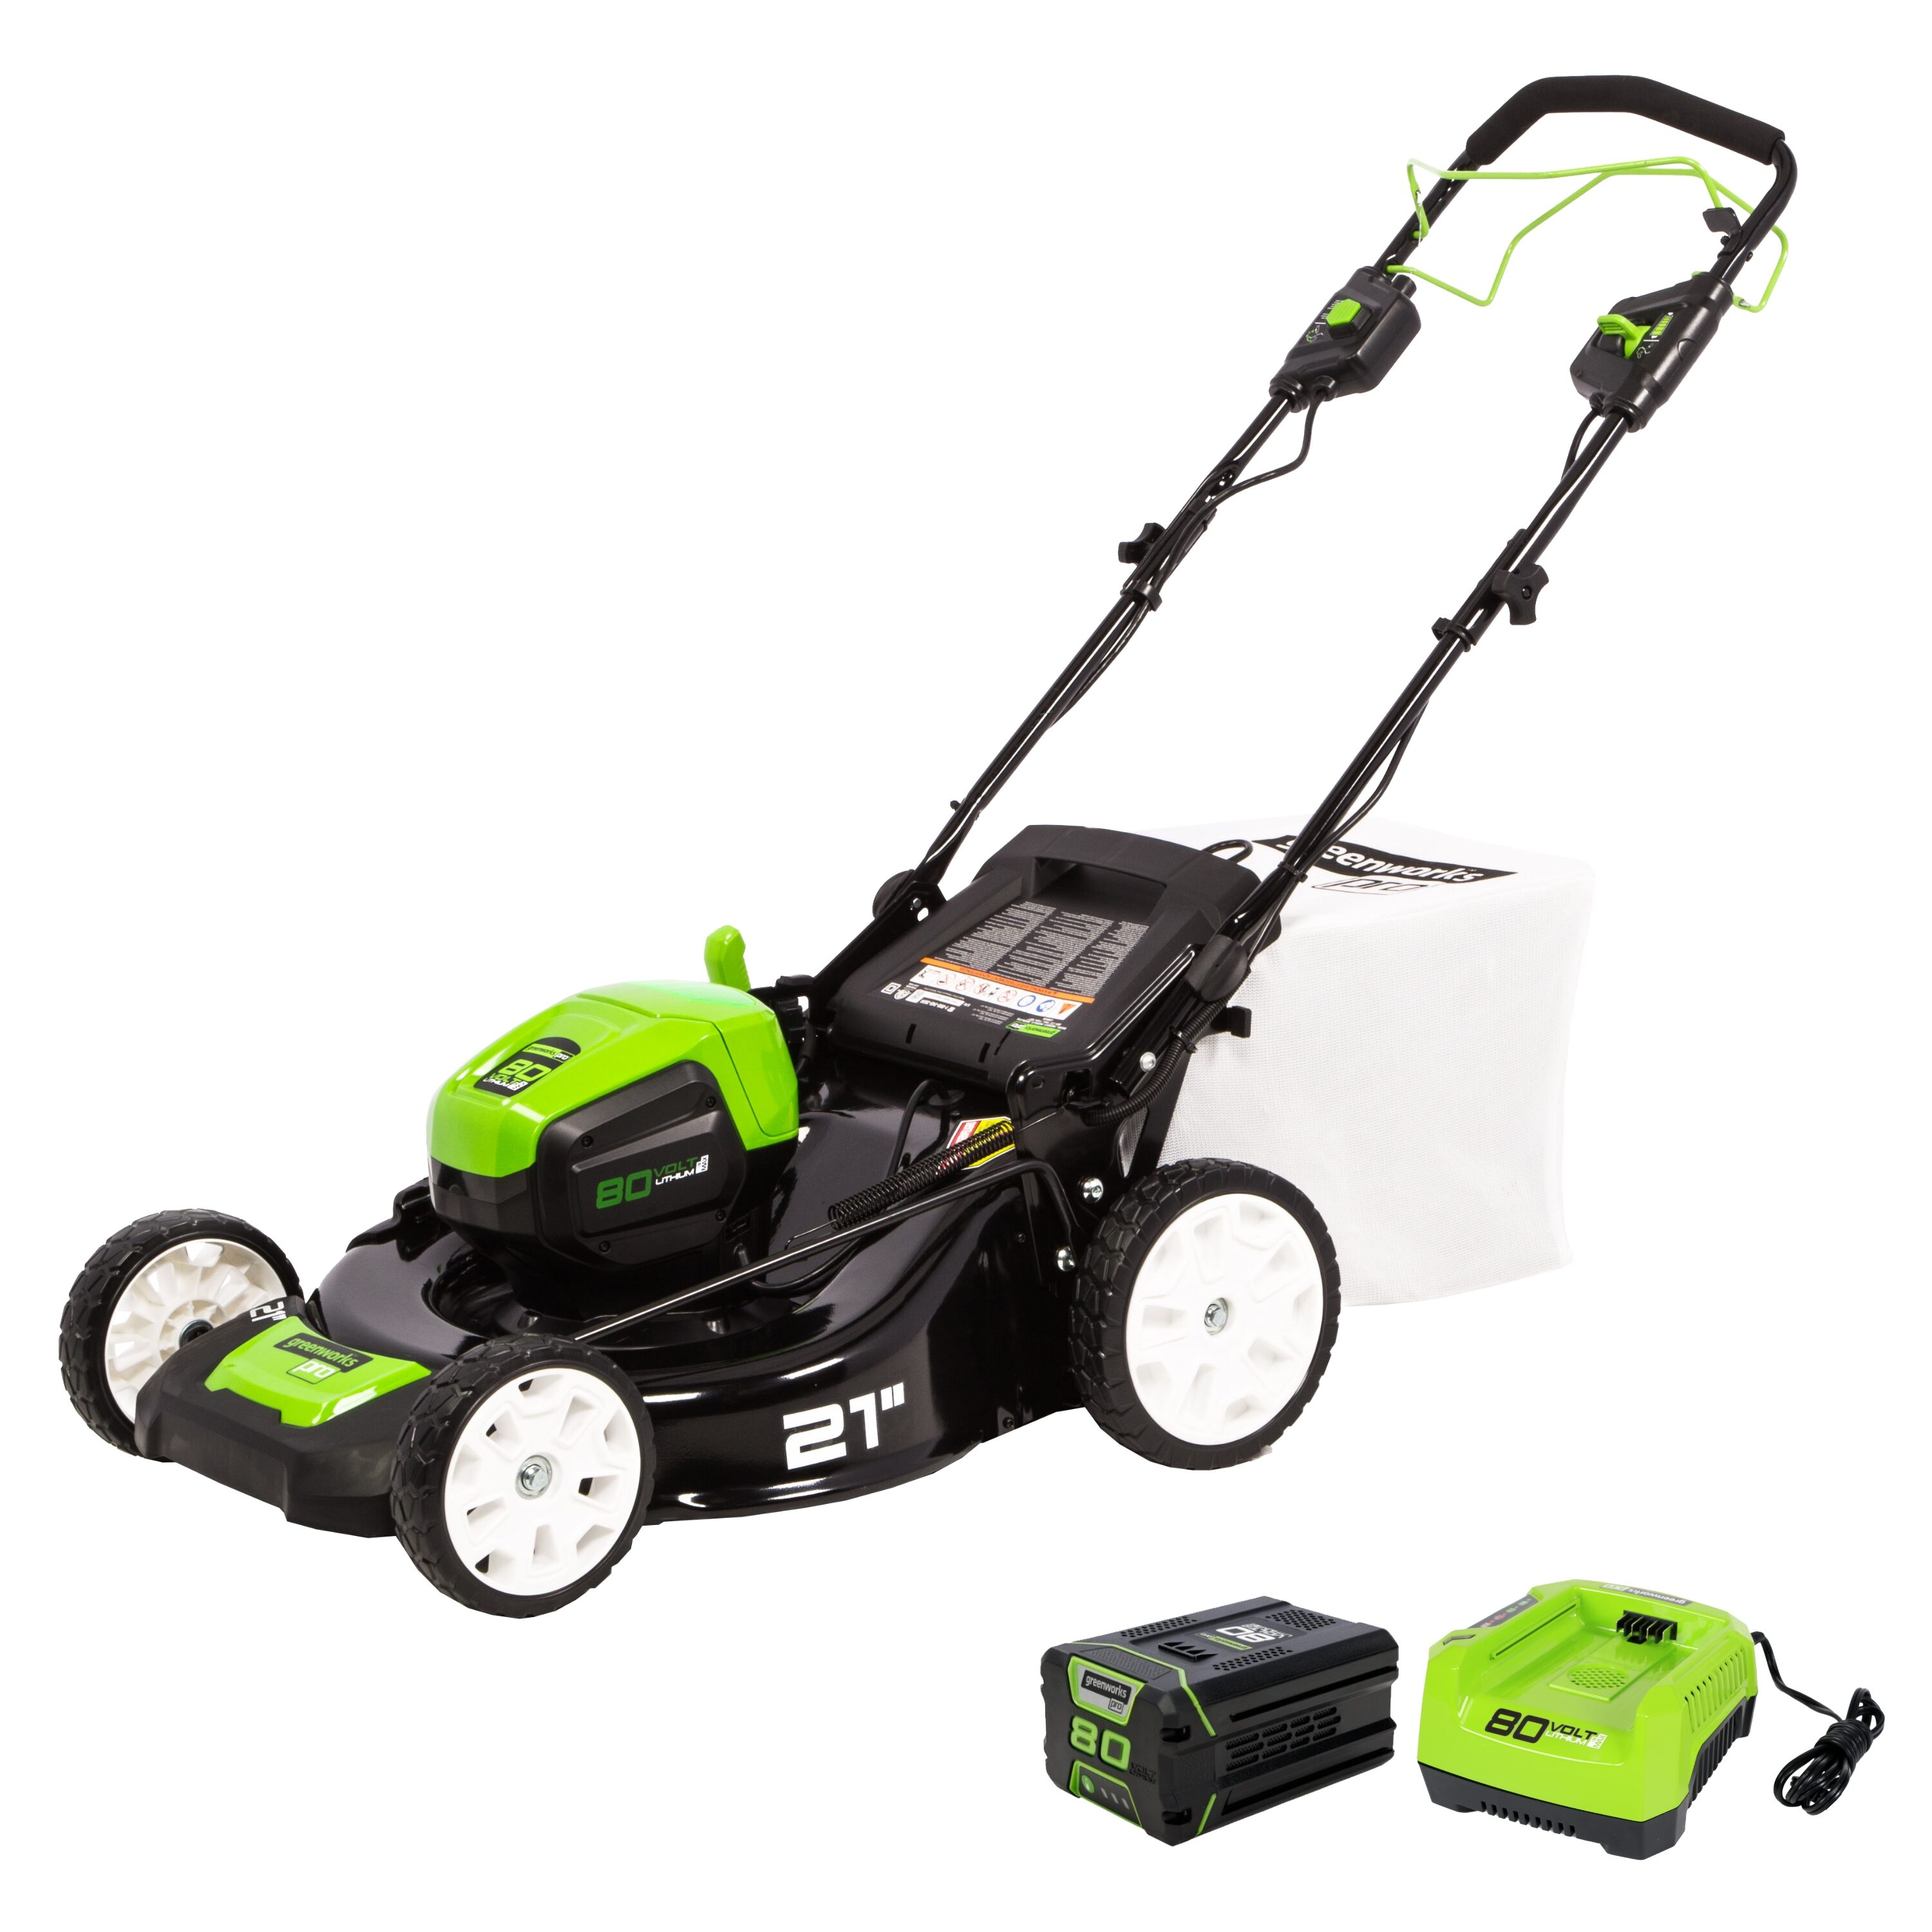 Greenworks 80-volt Max 21-in Cordless Self-propelled Lawn Mower 5